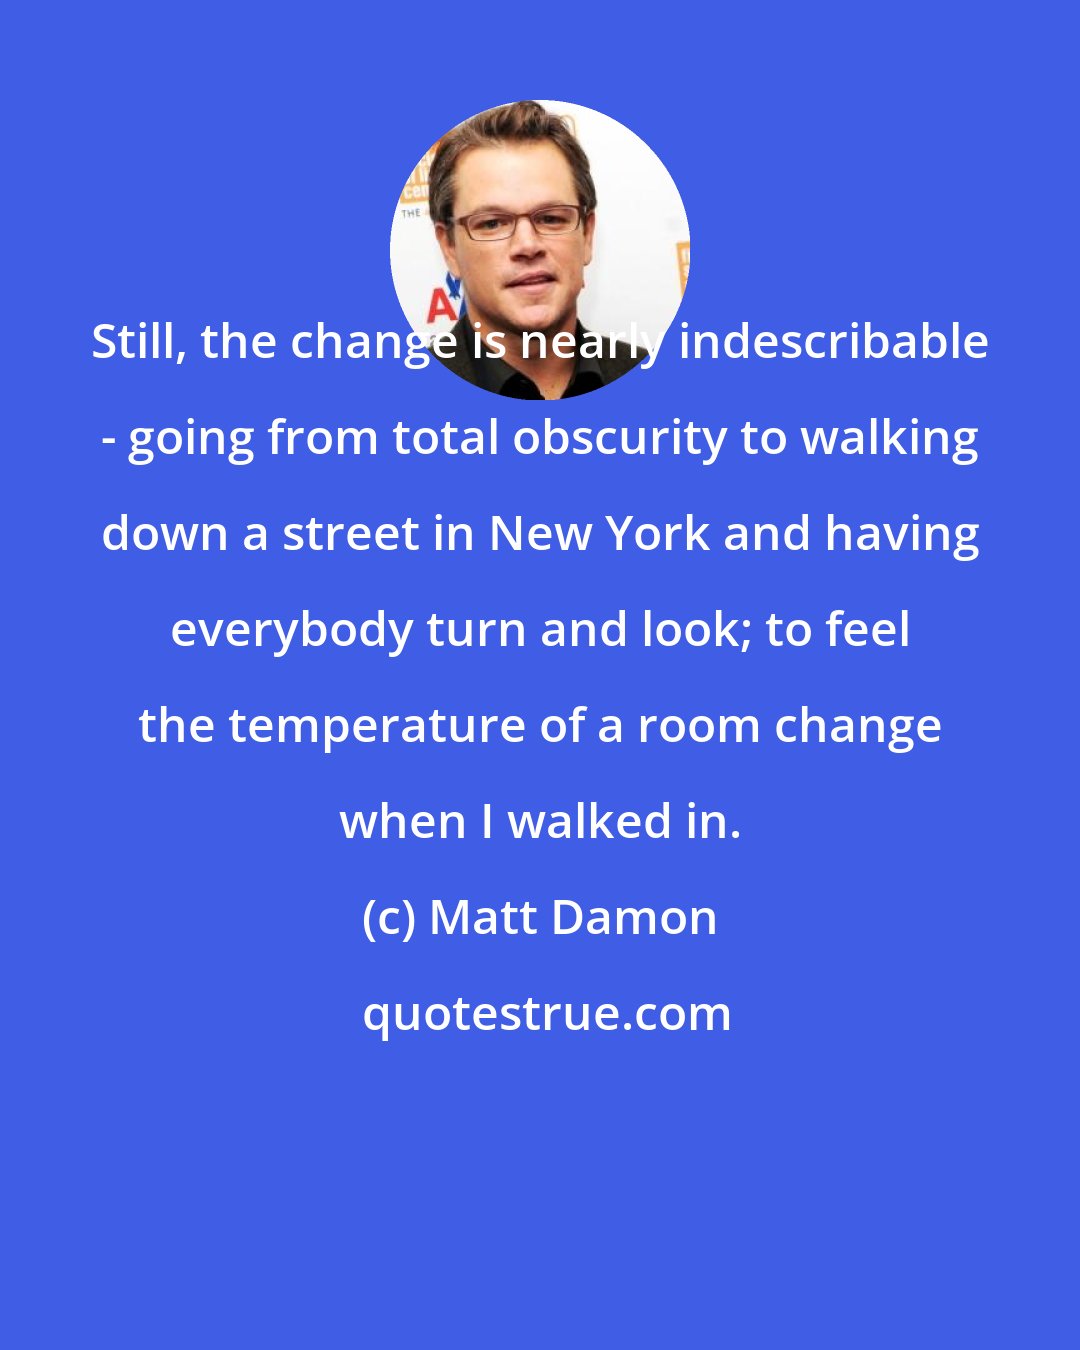 Matt Damon: Still, the change is nearly indescribable - going from total obscurity to walking down a street in New York and having everybody turn and look; to feel the temperature of a room change when I walked in.